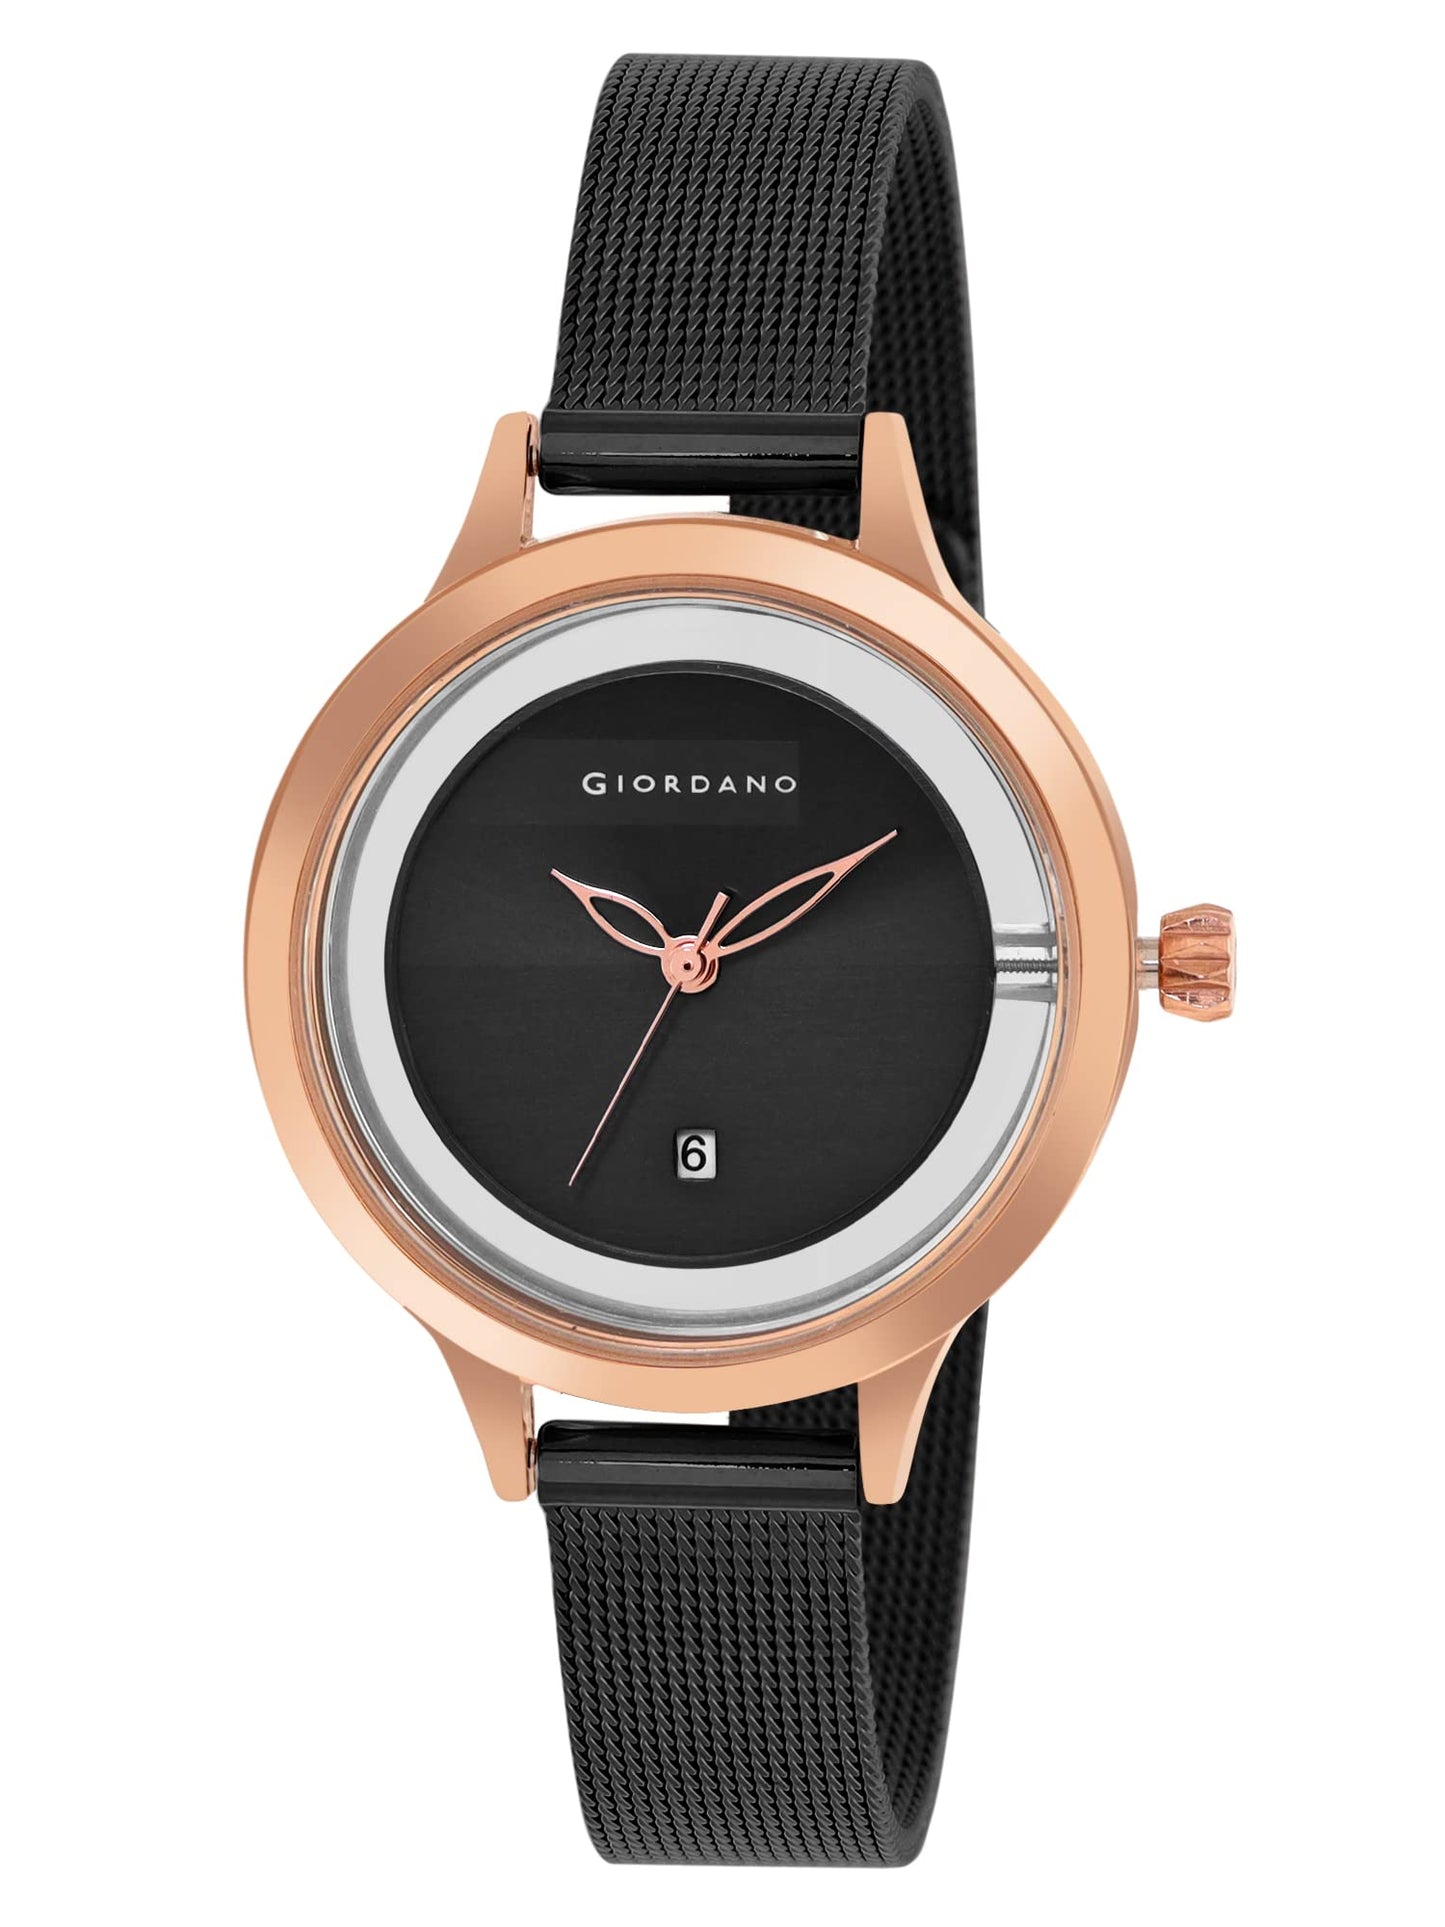 Giordano Analog Watch for Women's with See through Elegant Dial with Stainless Steel Strap|Round Shape Fashion Wrist Watch for Women|Ladies|Girls to Compliment Your Look|Ideal Gift for Women's - GD-60010